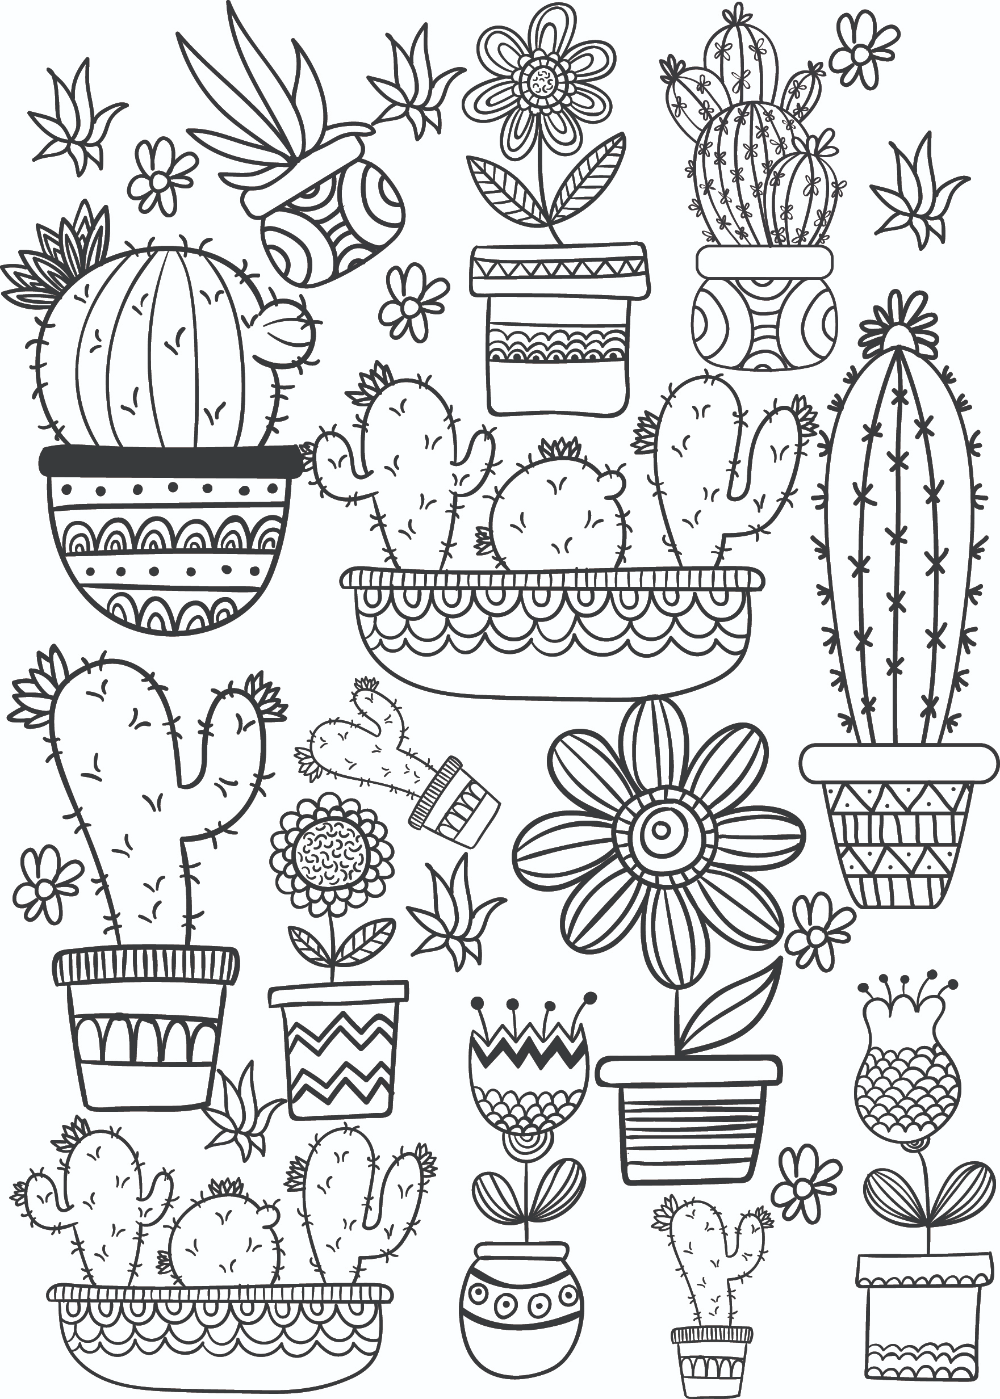 Cactus and succulent printable adult coloring pages free adult coloring pages shape coloring pages printable adult coloring pages